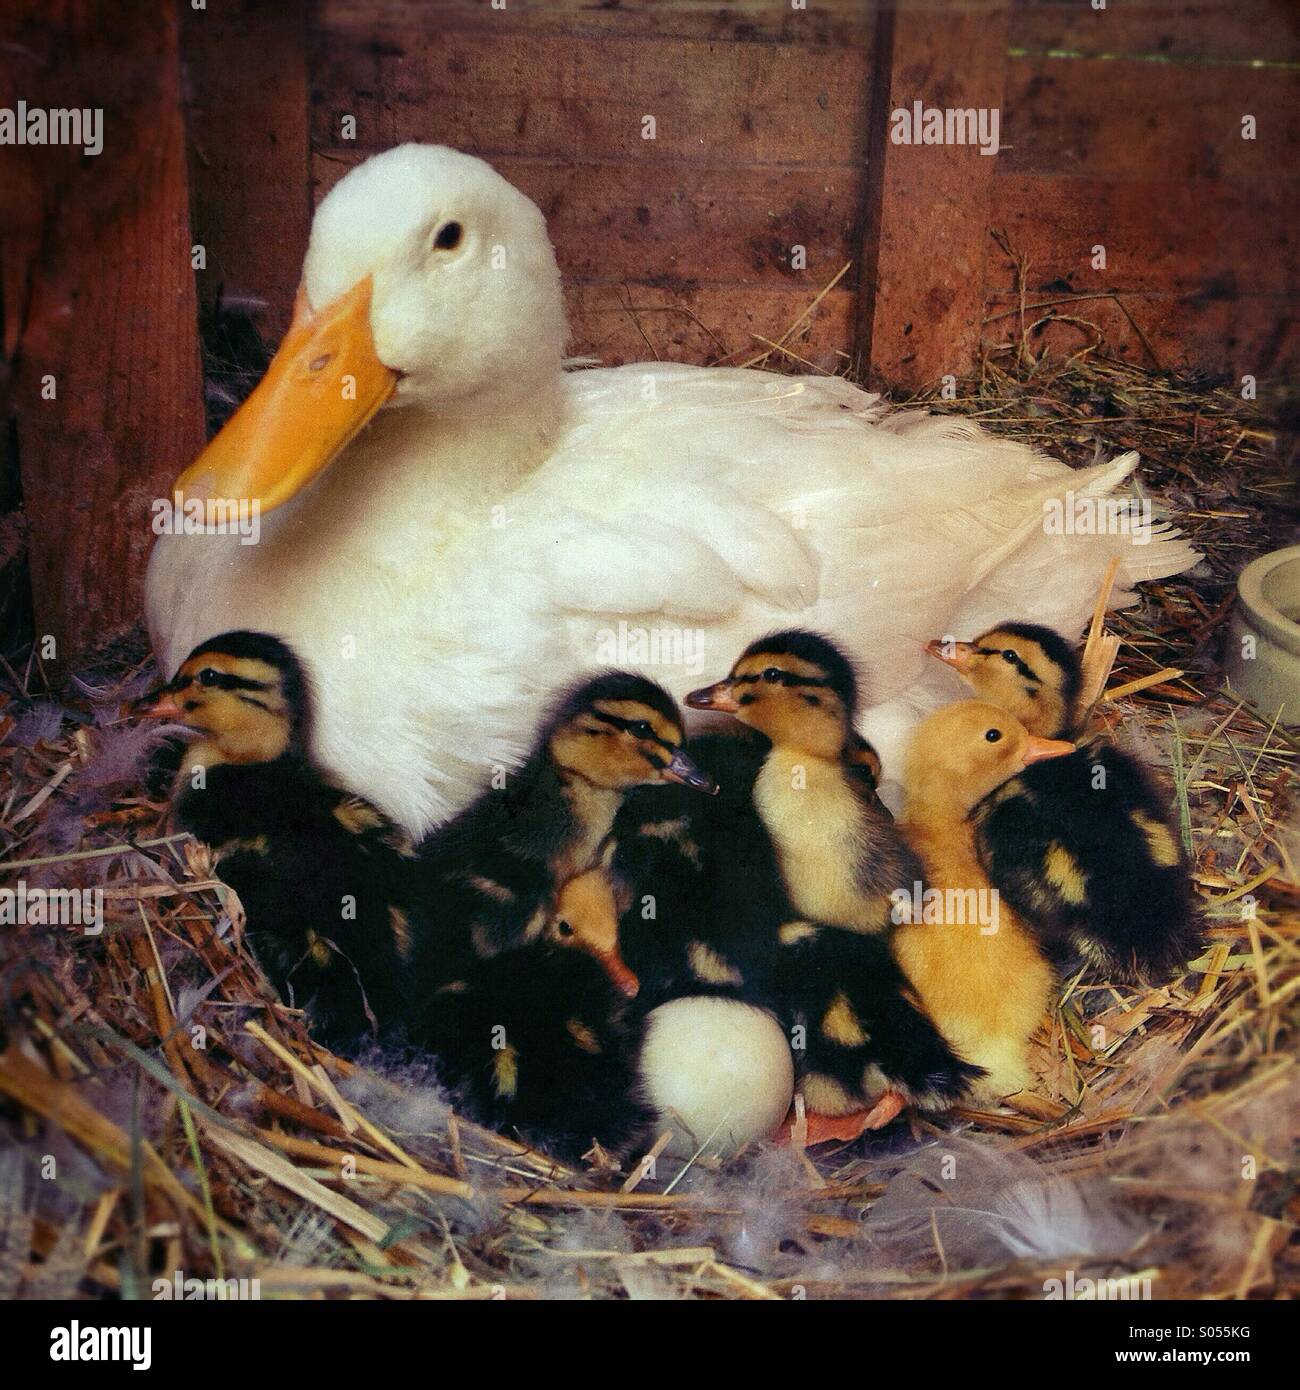 Mother duck with young one day old ducklings in nest. Stock Photo